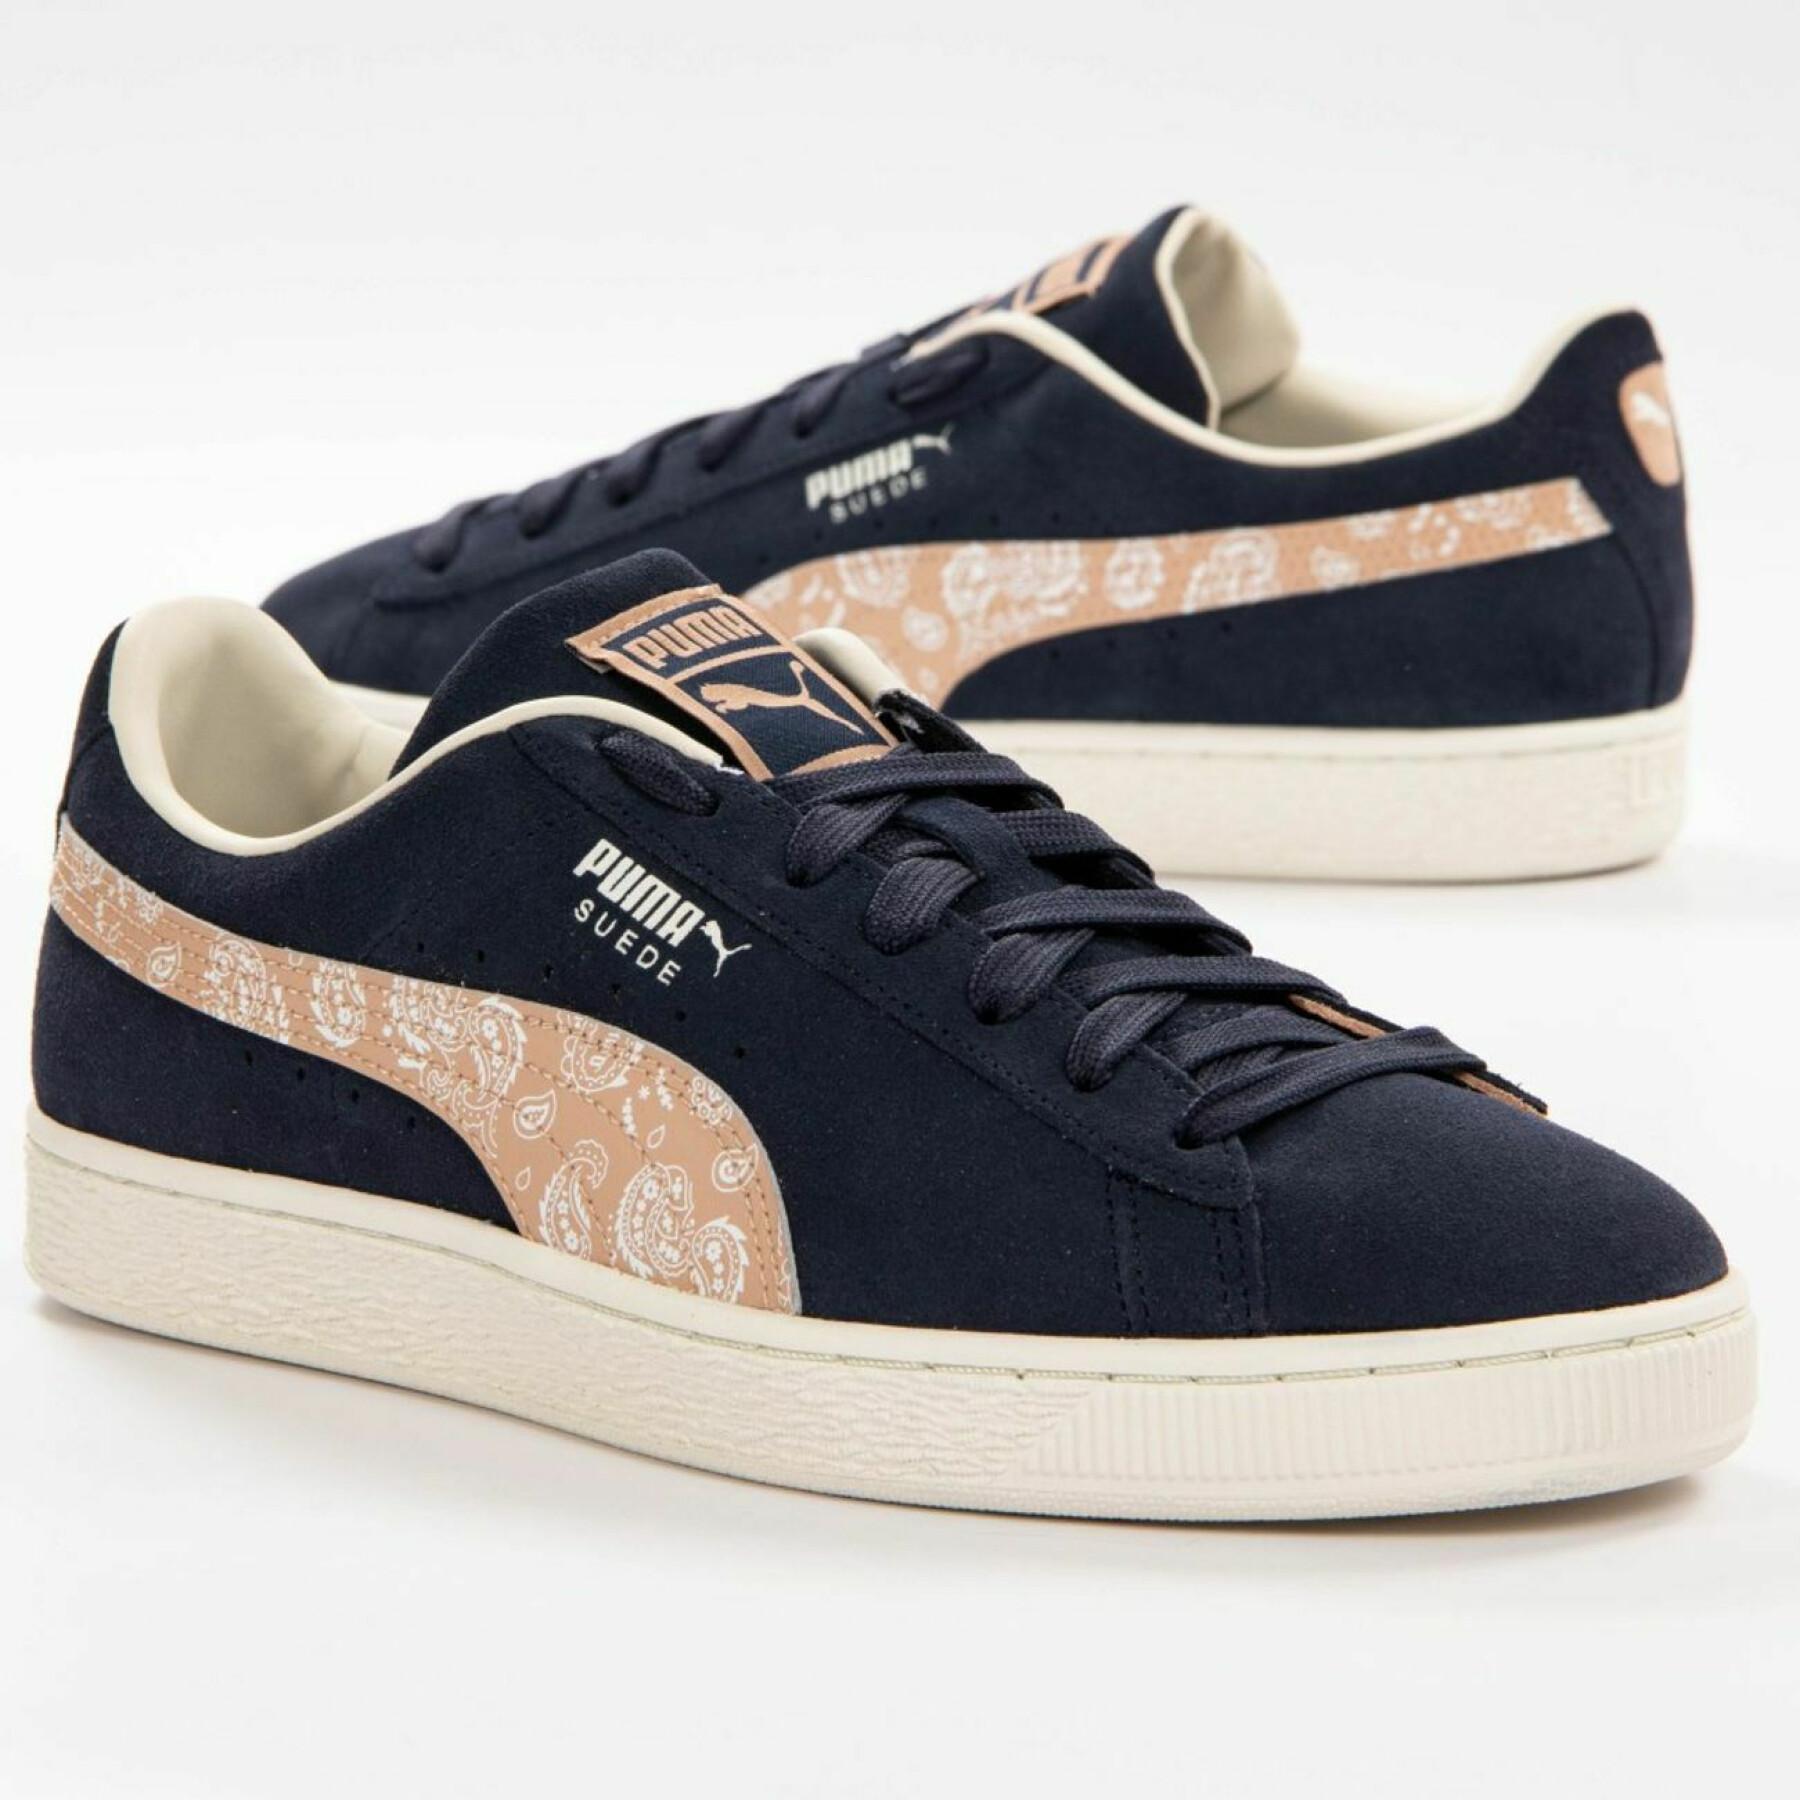 Chaussures Puma Suede Classic XXI PSLY